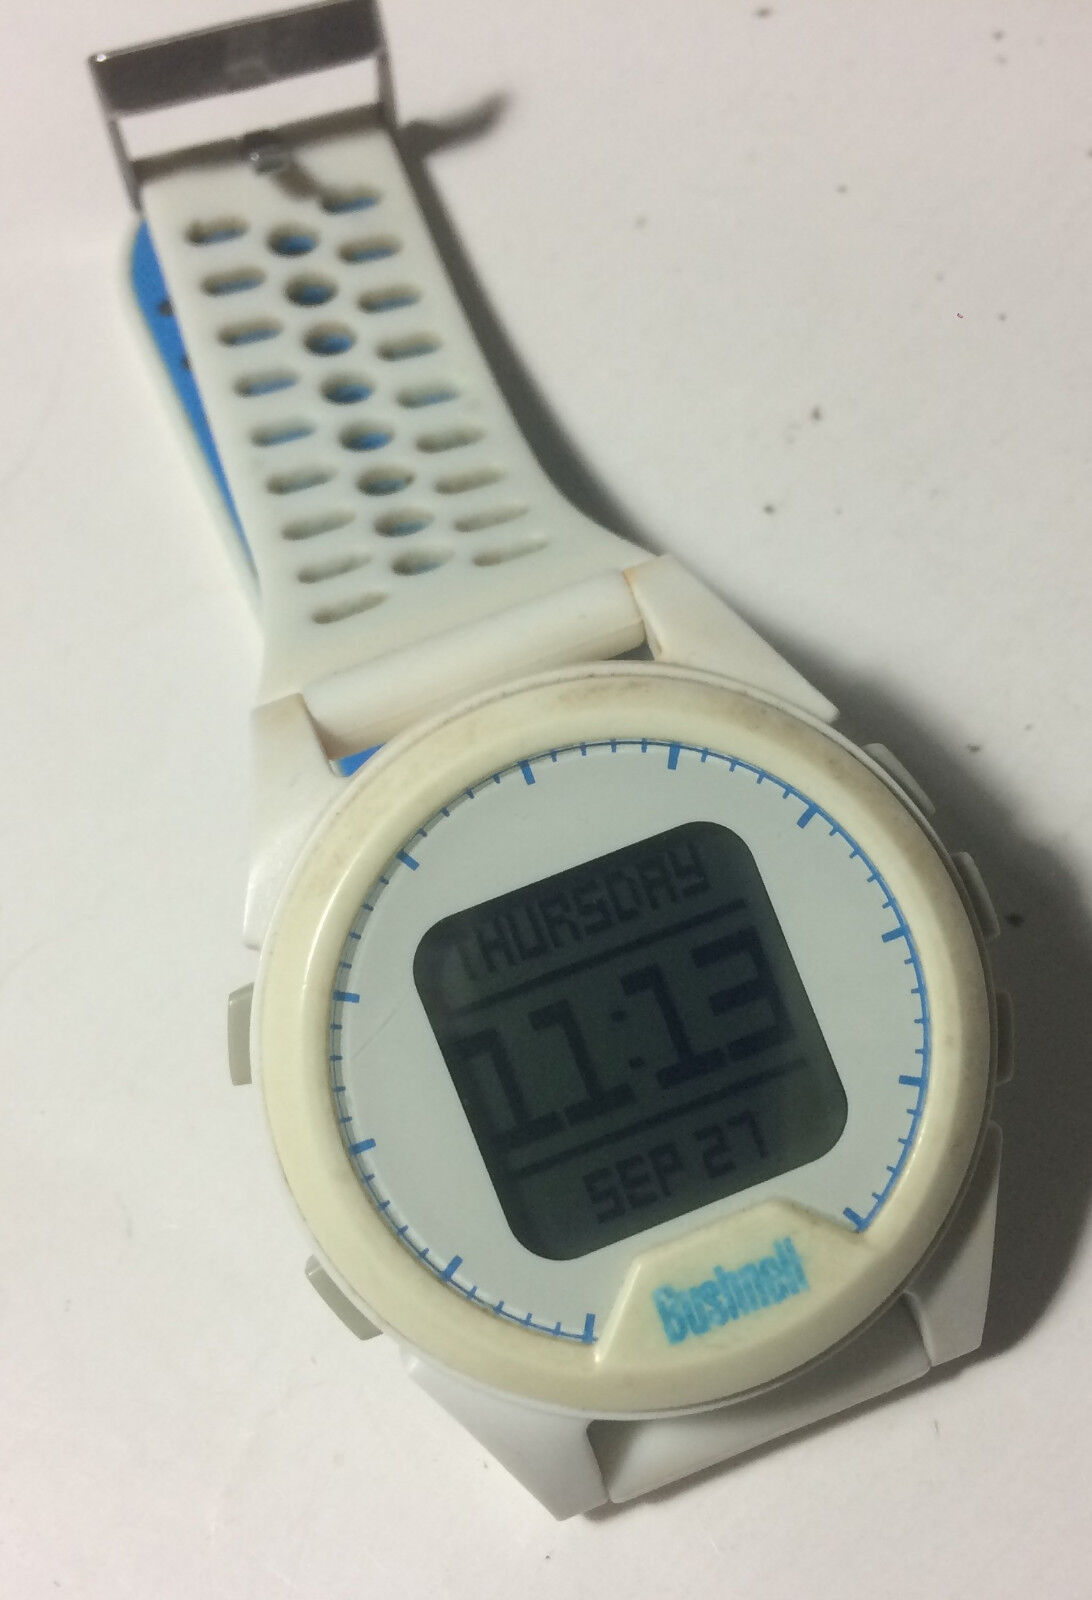 Bushnell Neo Ion White Golf GPS Watch No Charger Work Great Free Return Shipping